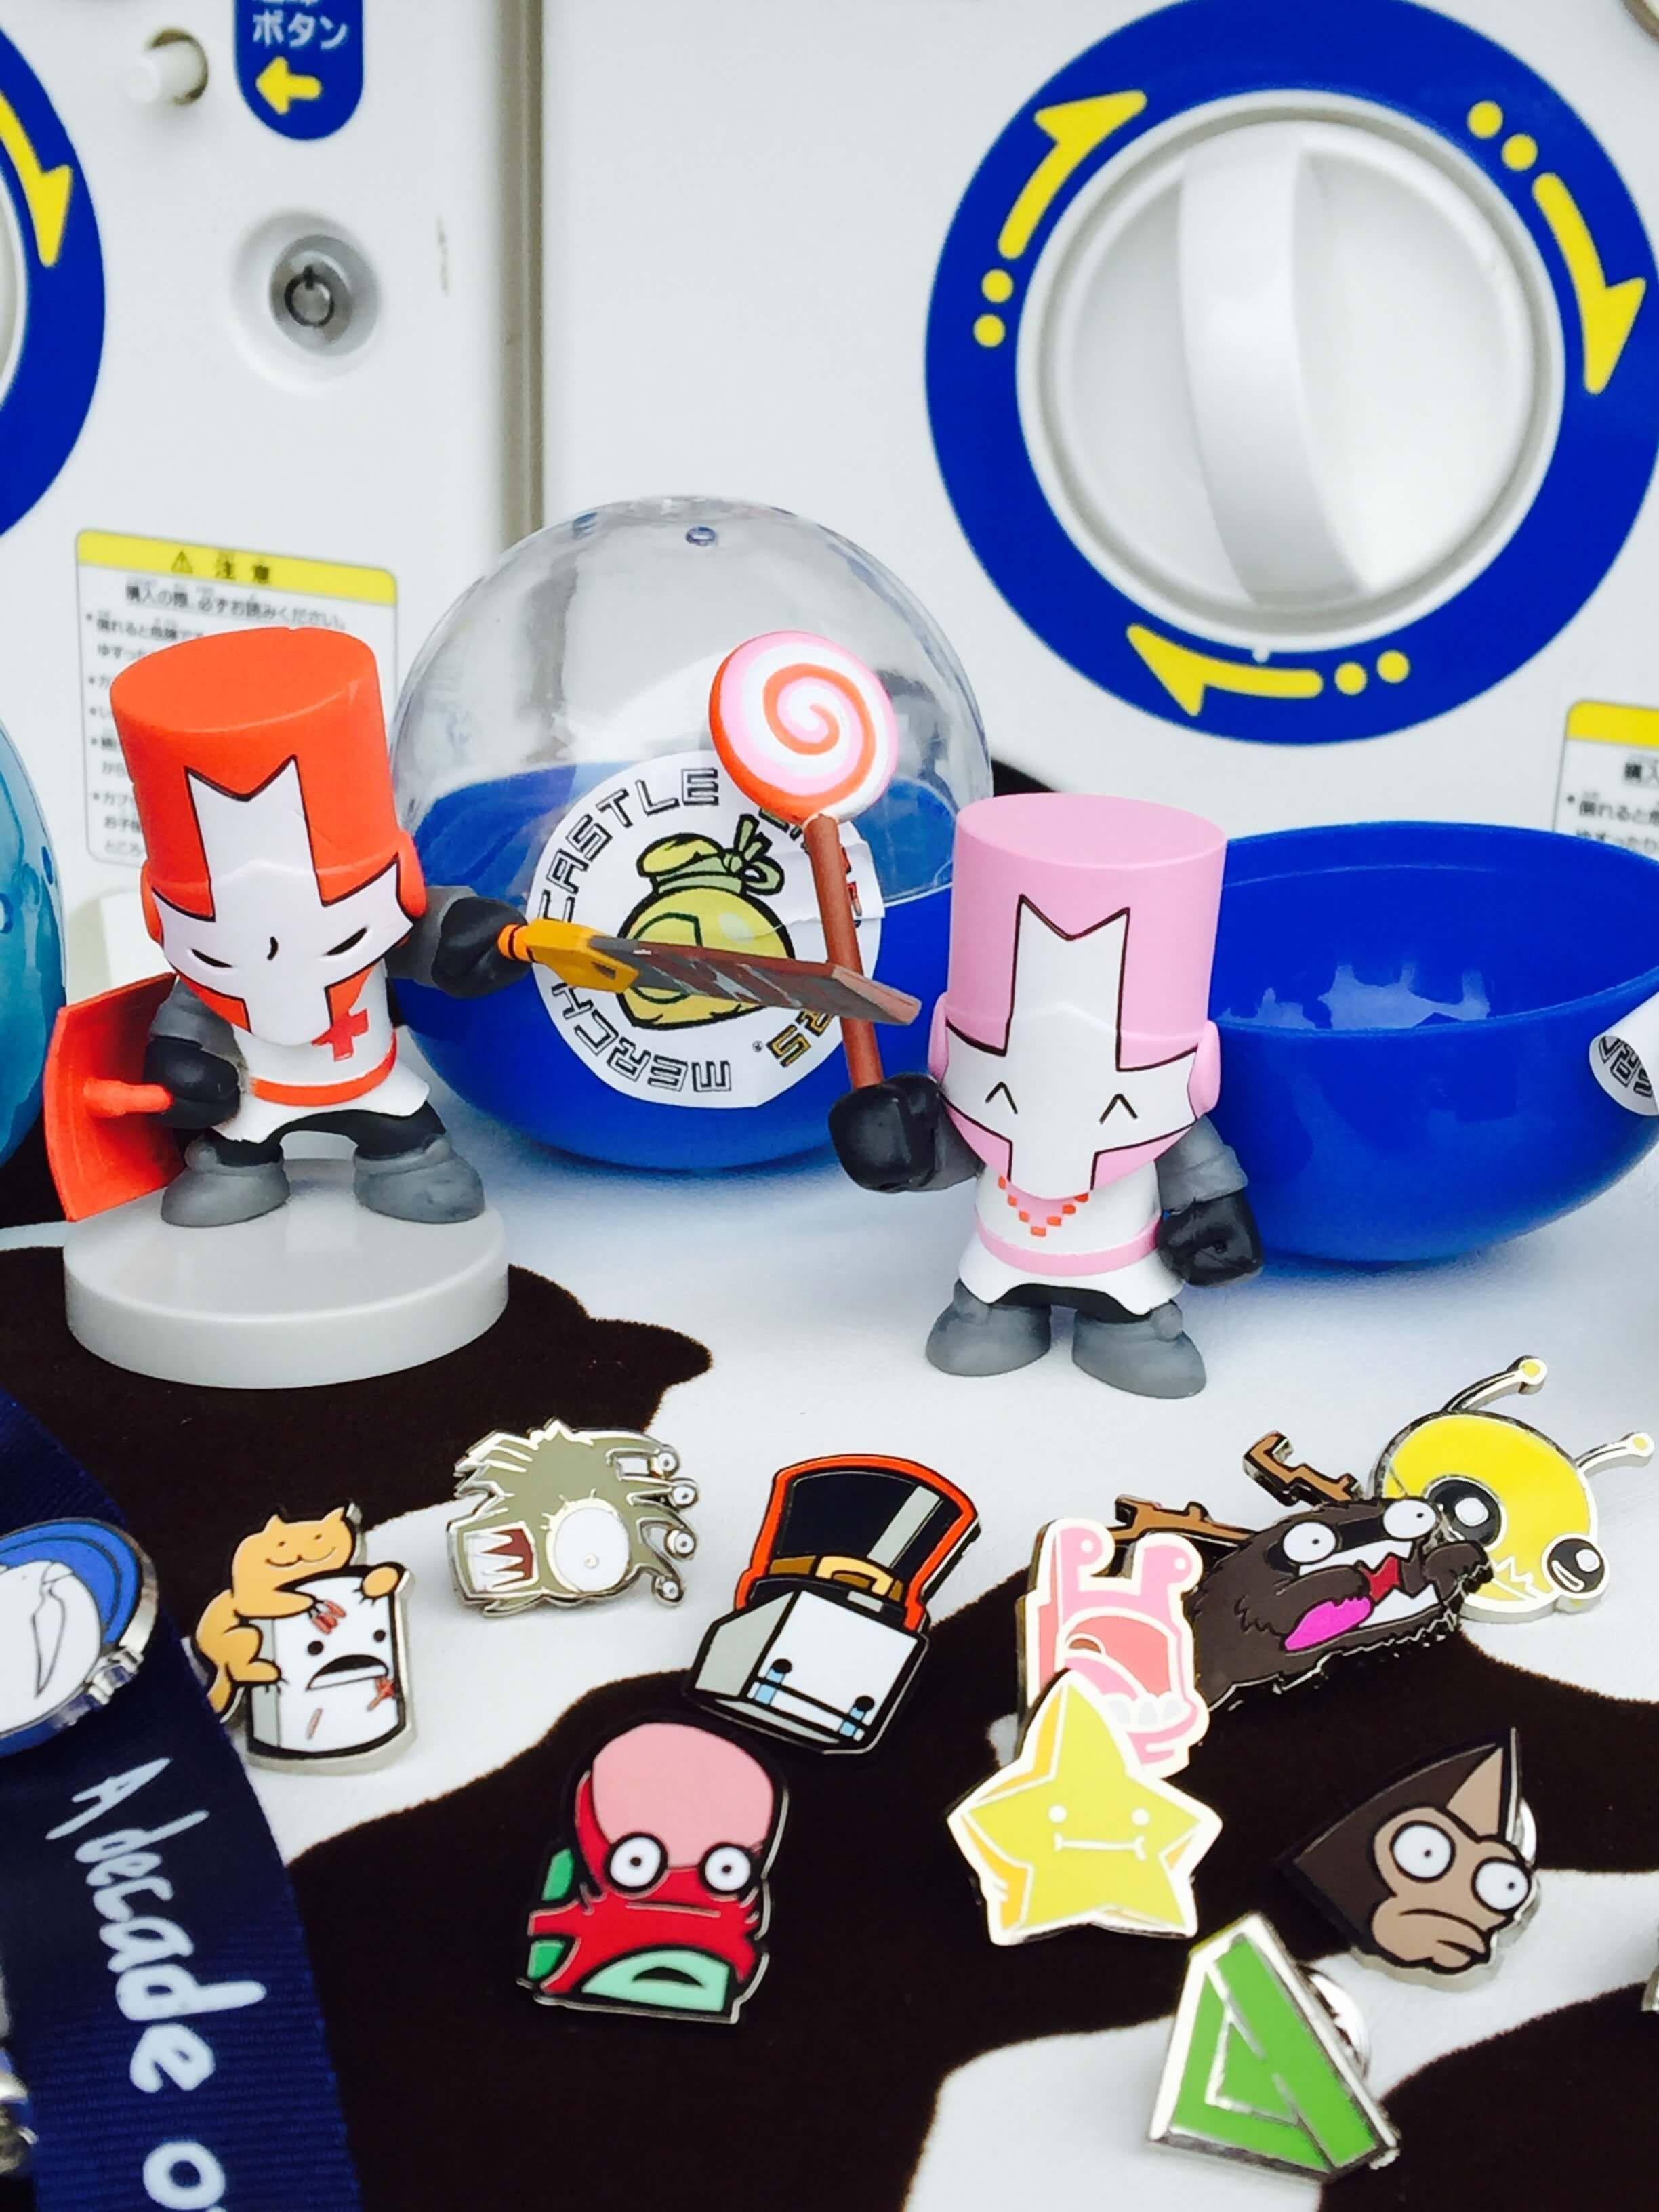 Castle Crashers Papercraft Tradeshow Only Mini Figurines and Various Pins Headed to Rtx 2017